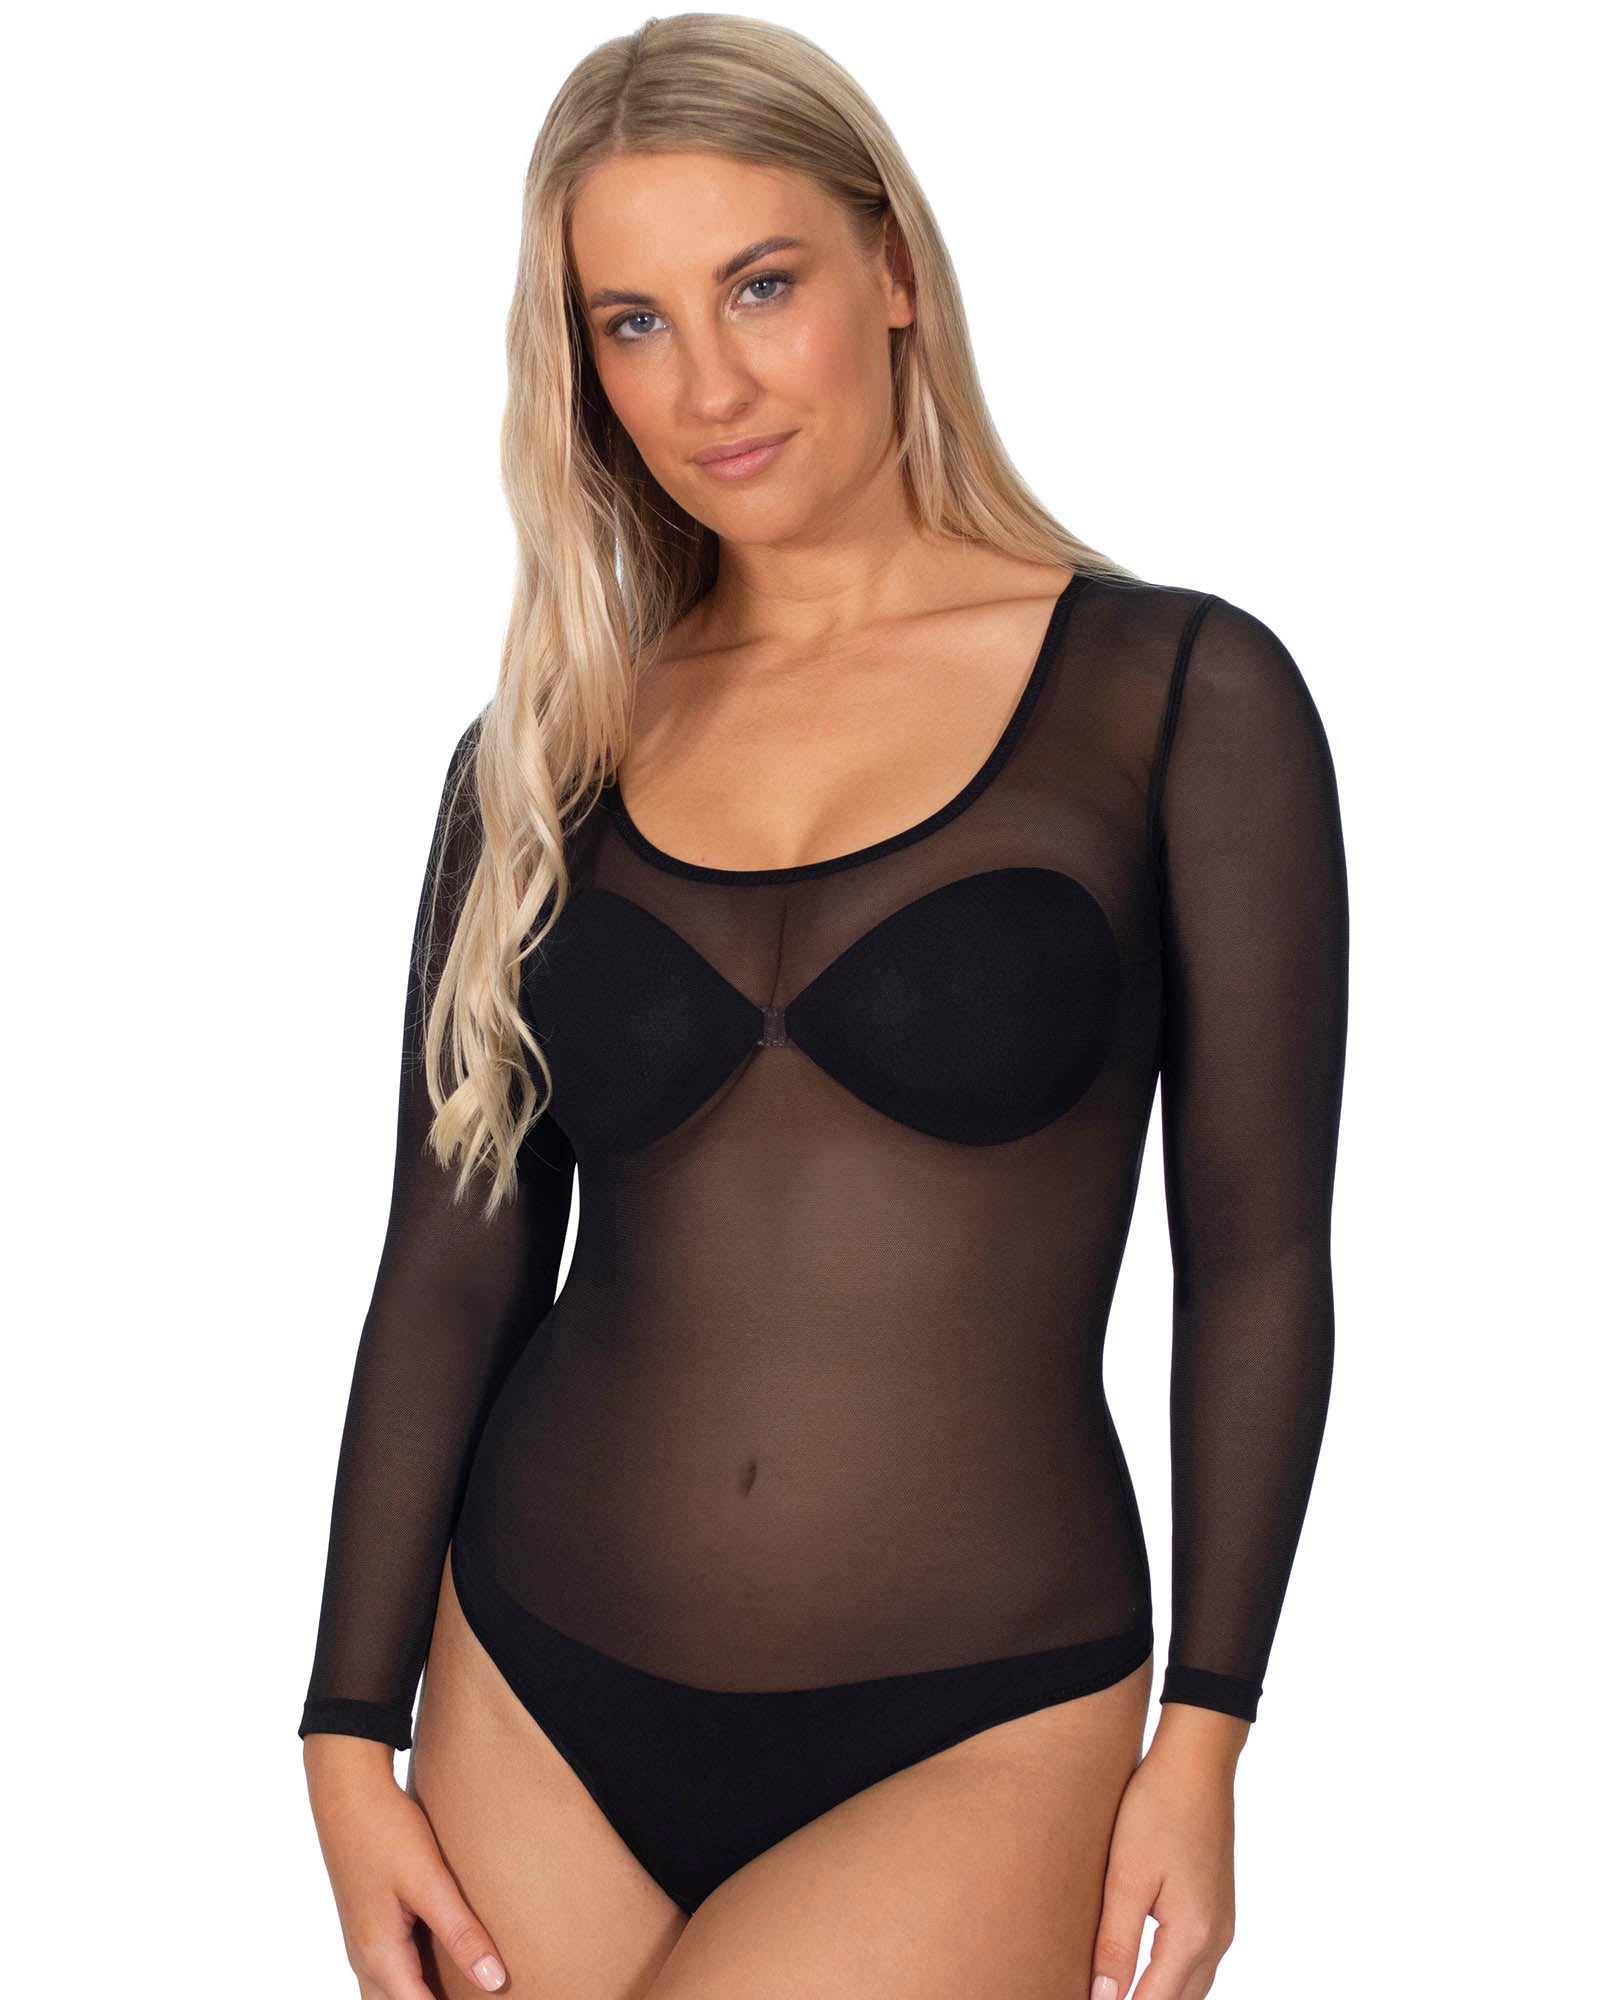 Power Mesh Front Shaping Panel Sexy Bodysuit